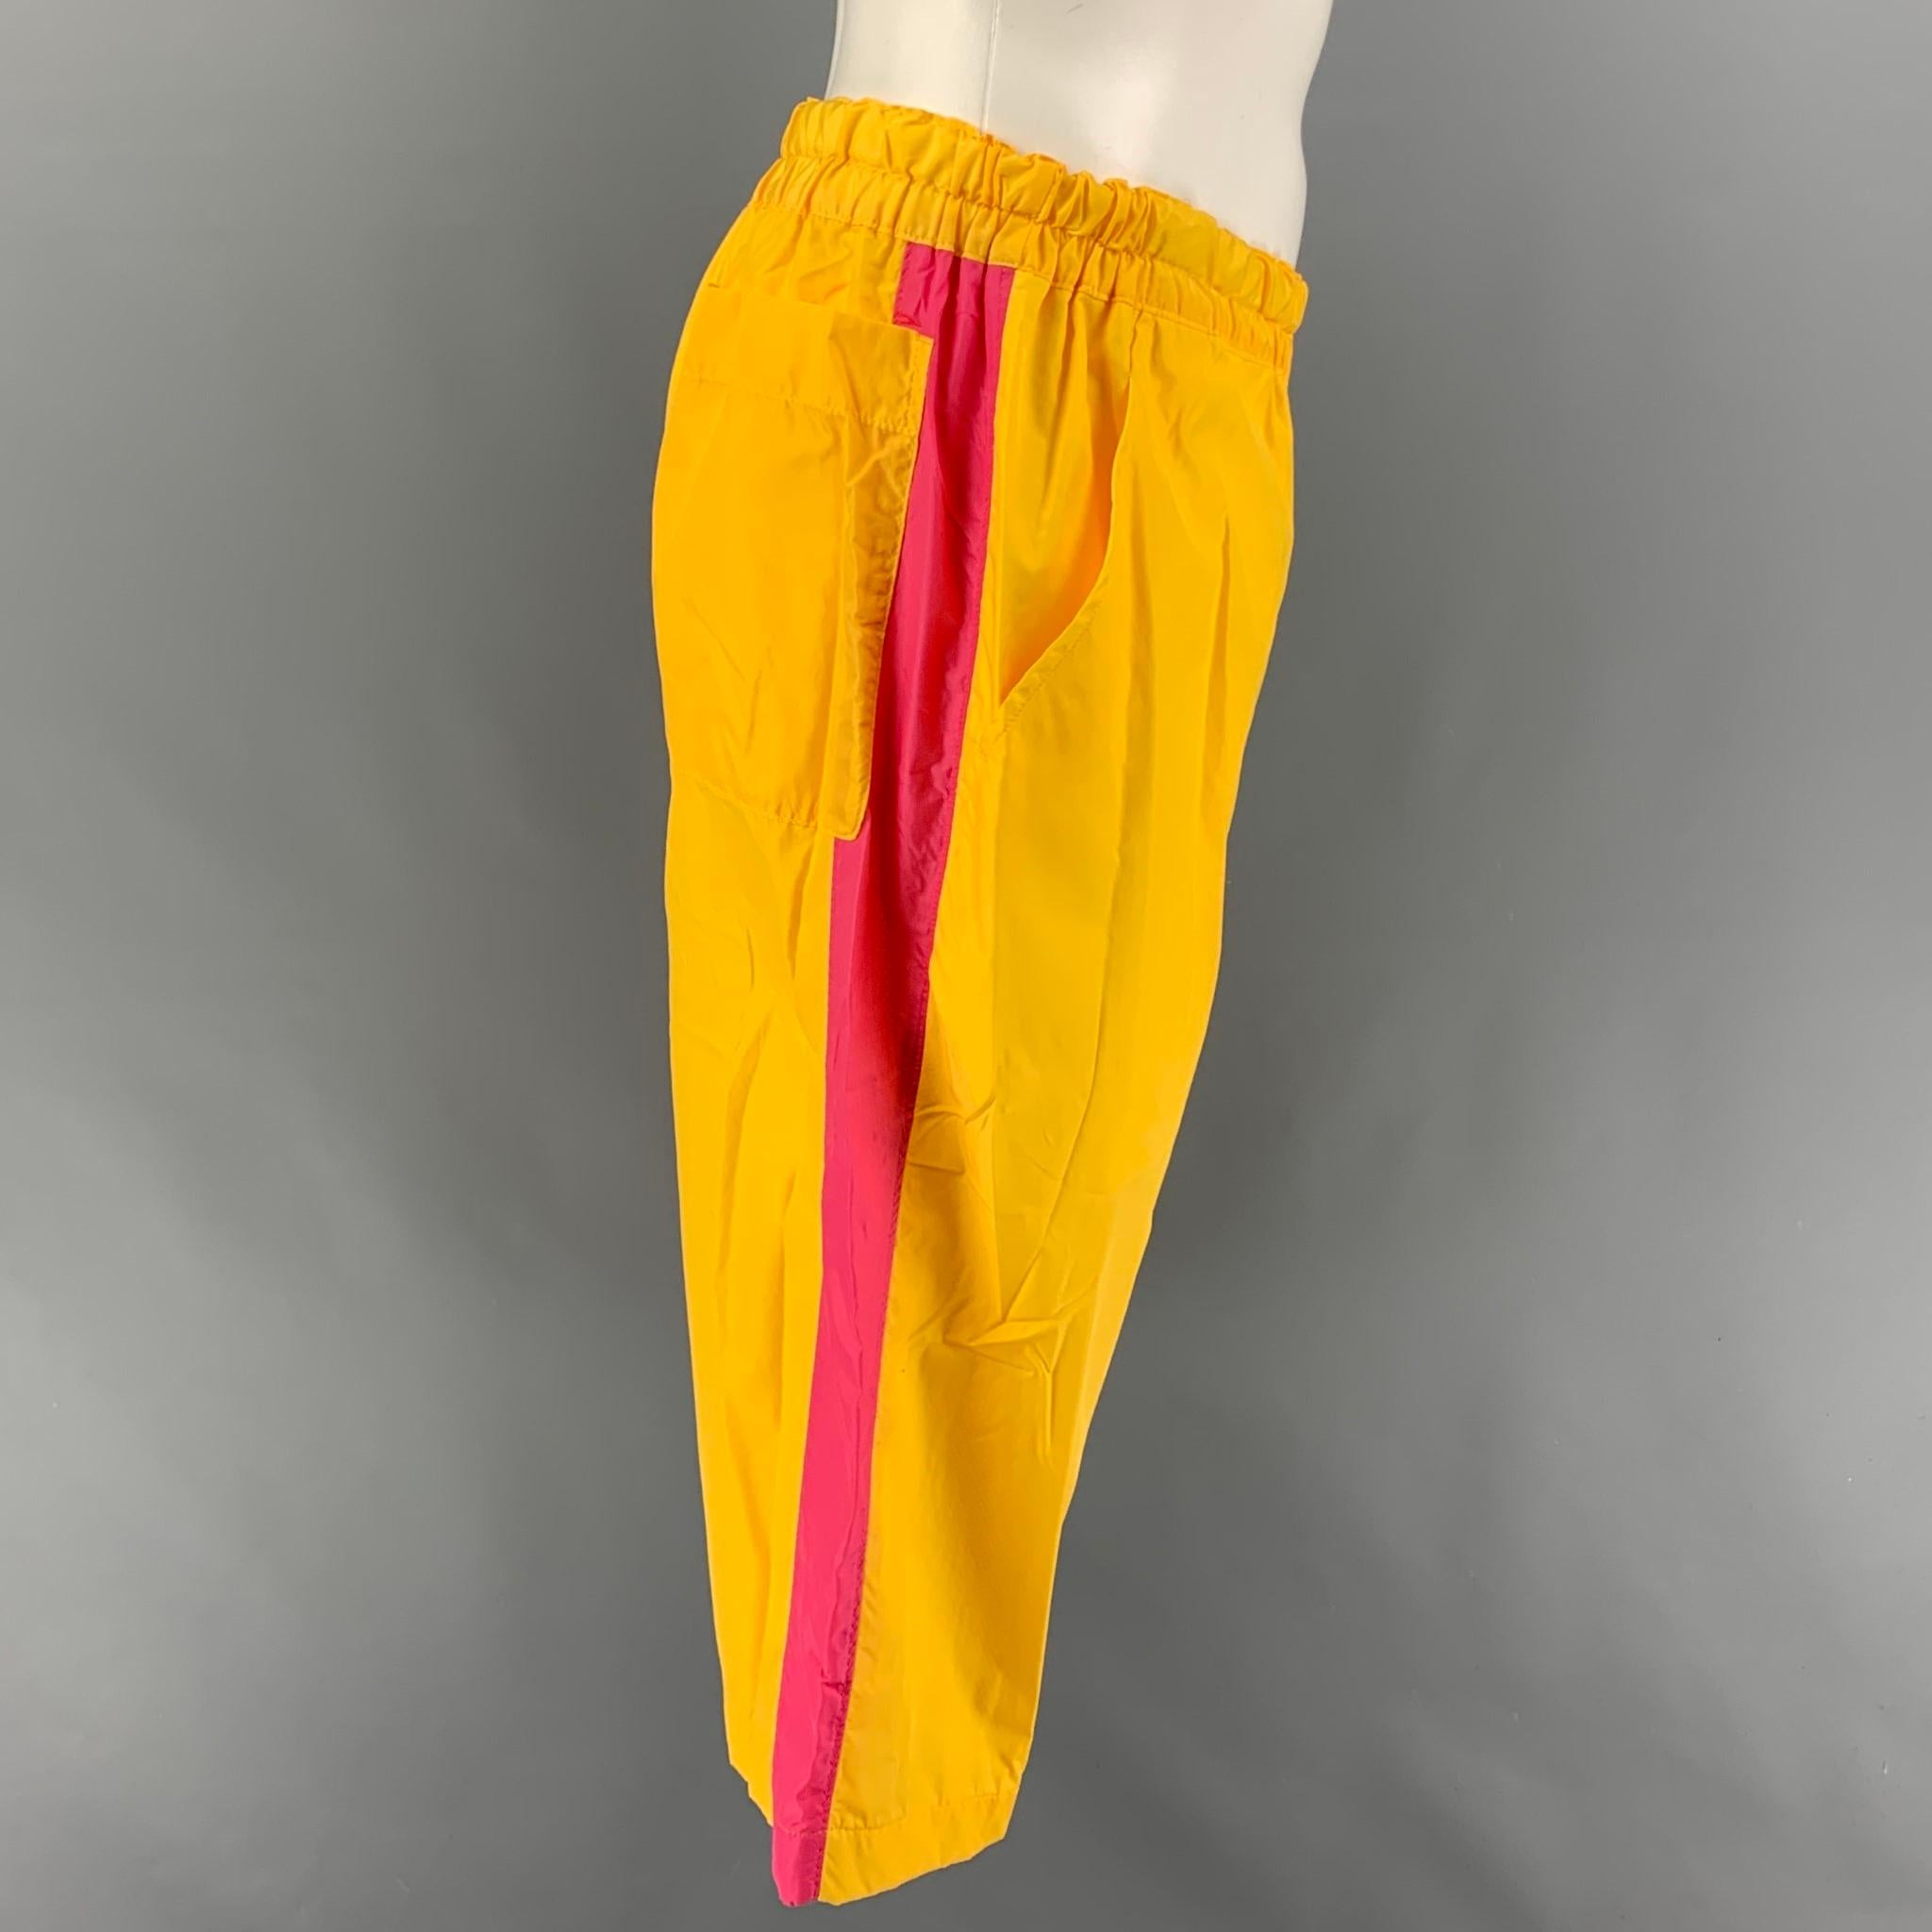 COMME des GARCONS SHIRT shorts comes in a yellow polyamide with a nylon net lining featuring a pink stripe, back pockets, elastic waist, drawstring, and a zip fly closure. Made in Japan. 

New With Tags. 
Marked: S

Measurements:

Waist: 32